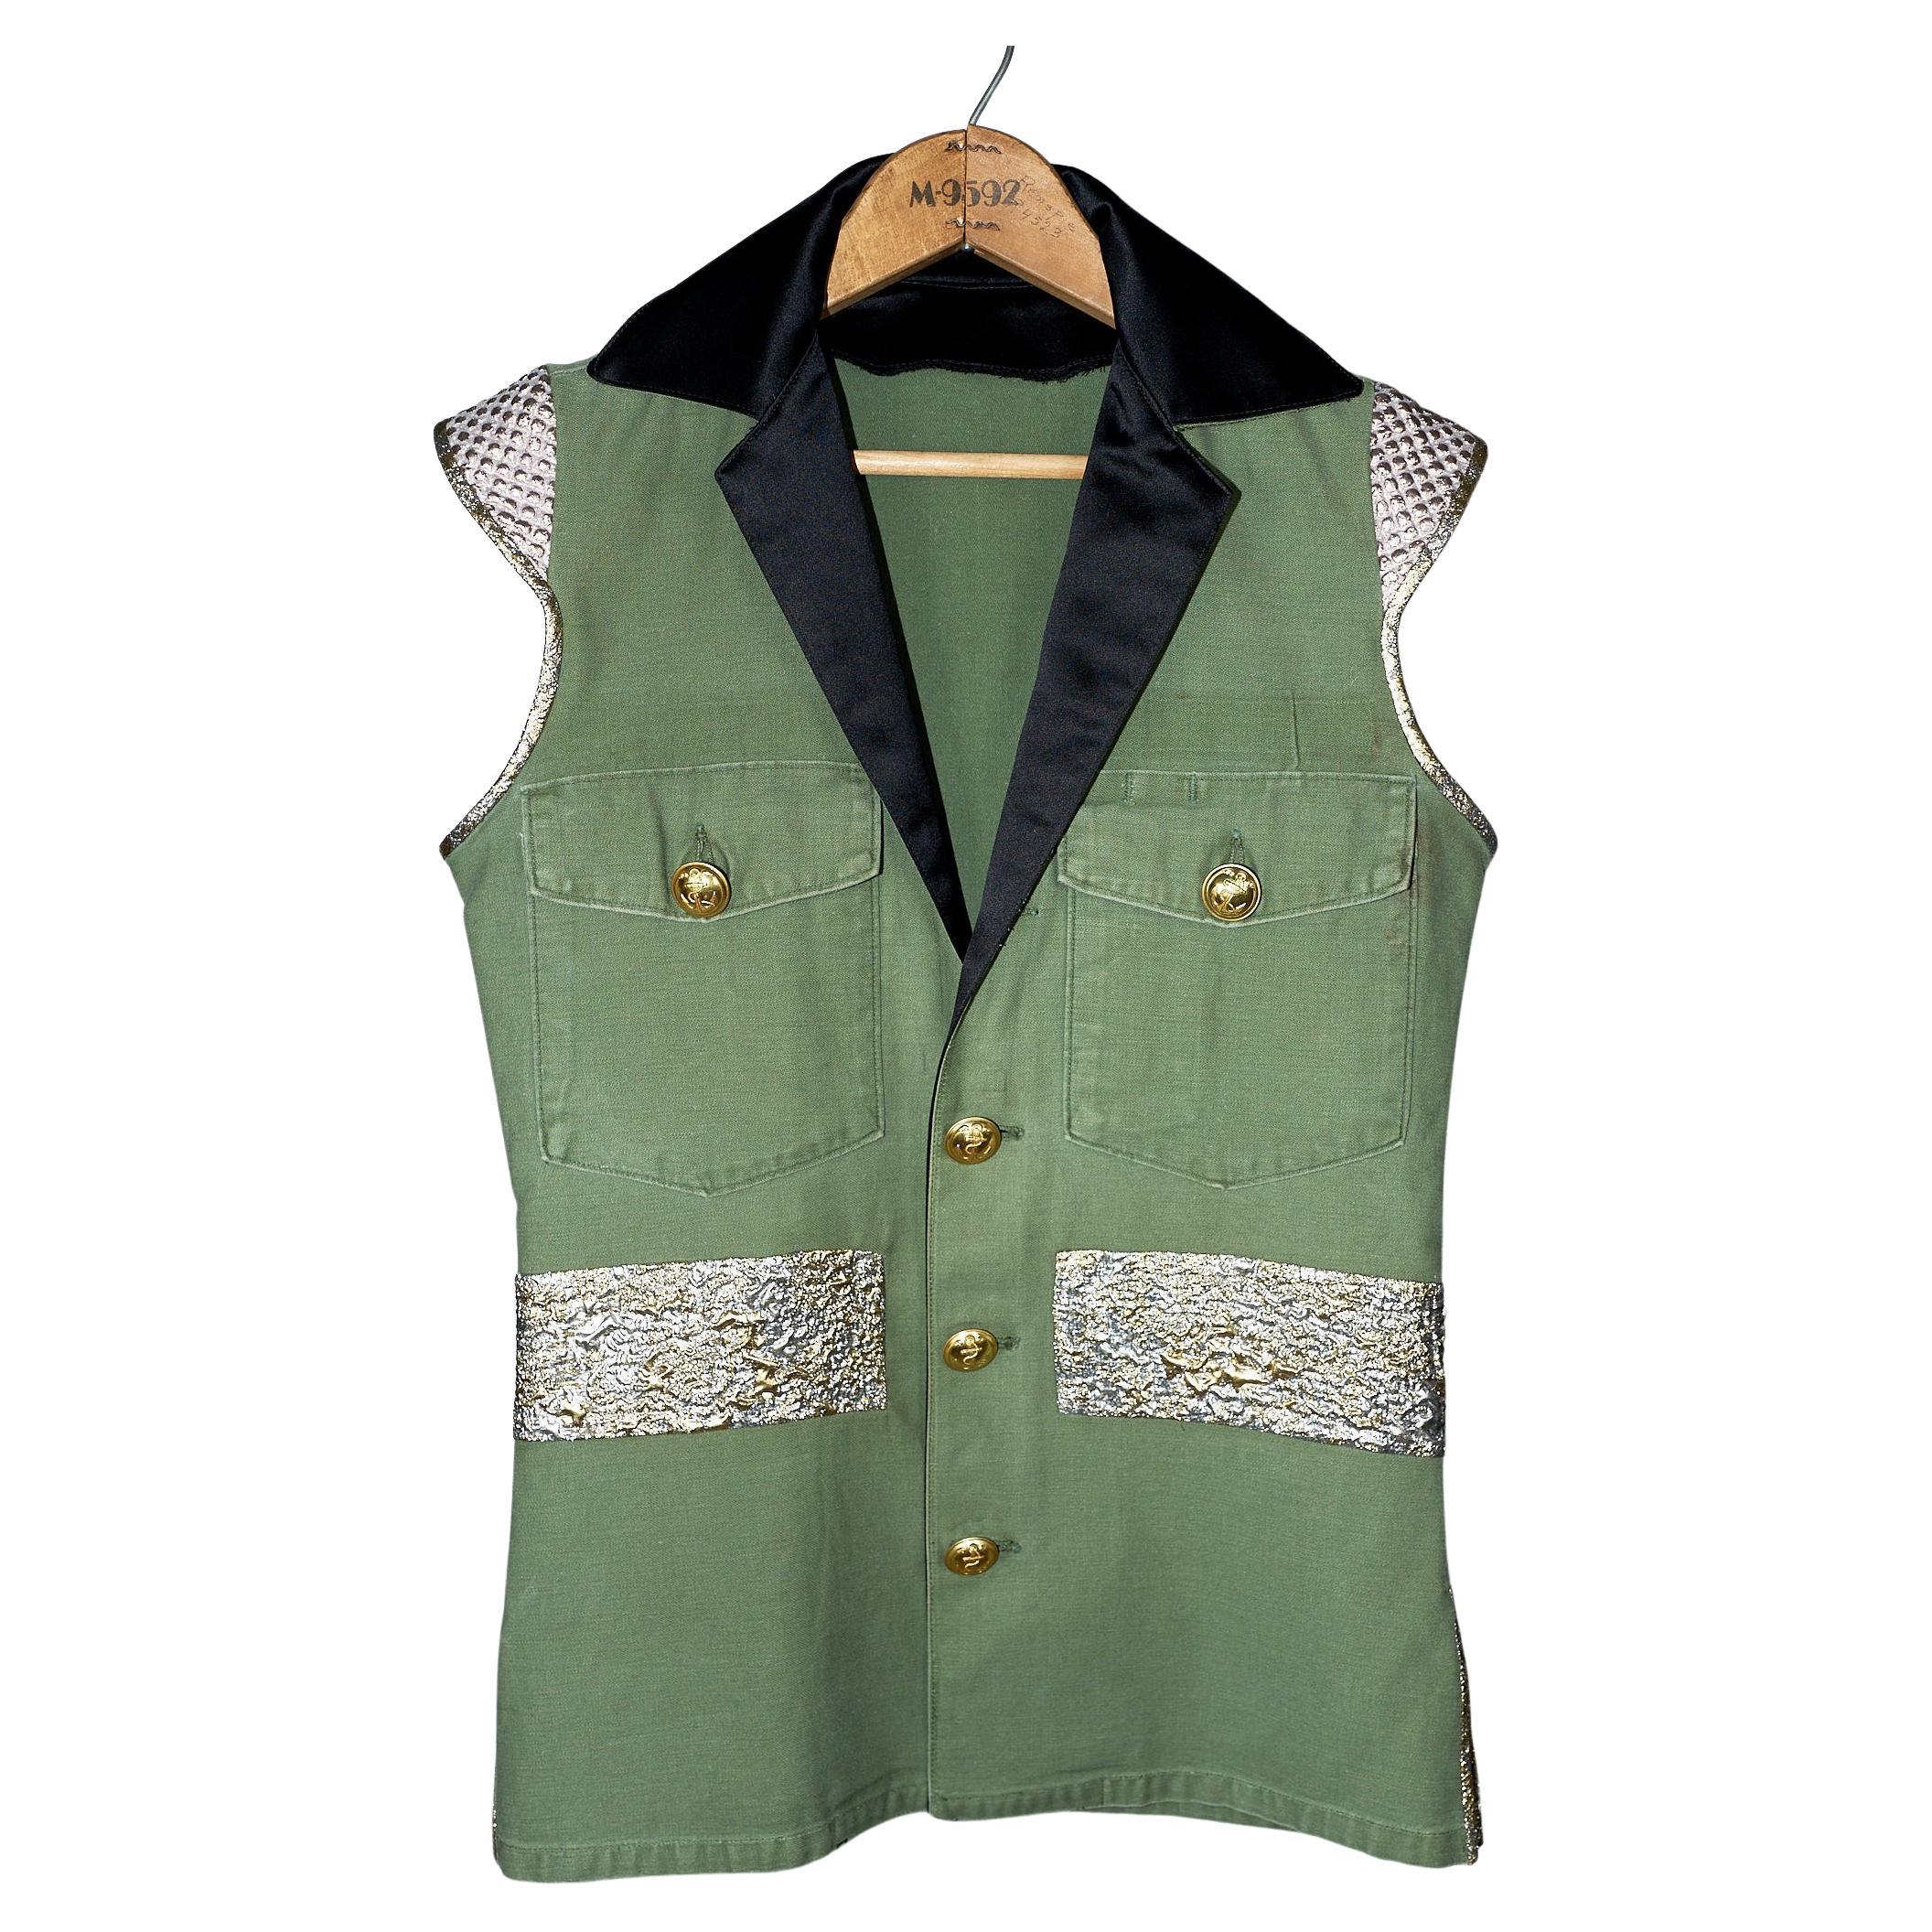 Designer J Dauphin 
Repurposed Us Fatigue Military Sleeveless Vest Jacket 
Trims: Italian Black 100% Silk Satin and Silver Gold Metallic Brocade
Vintage French Military Brass Buttons
Size: Small 


Designer: J Dauphin
Sustainable Luxury, Collectible